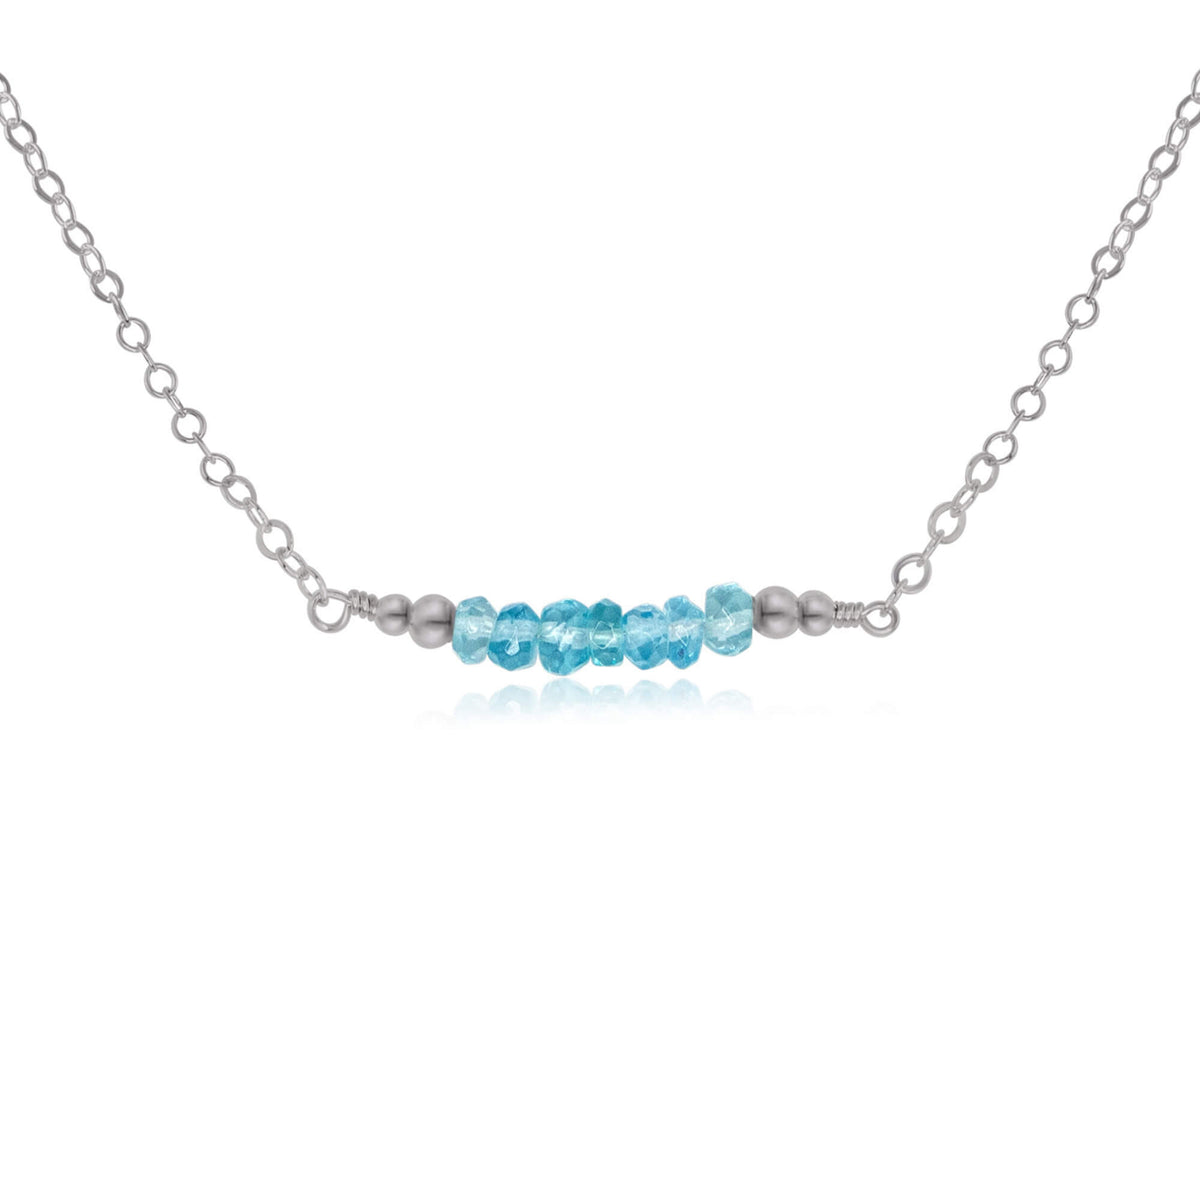 Faceted Bead Bar Necklace - Apatite - Stainless Steel - Luna Tide Handmade Jewellery